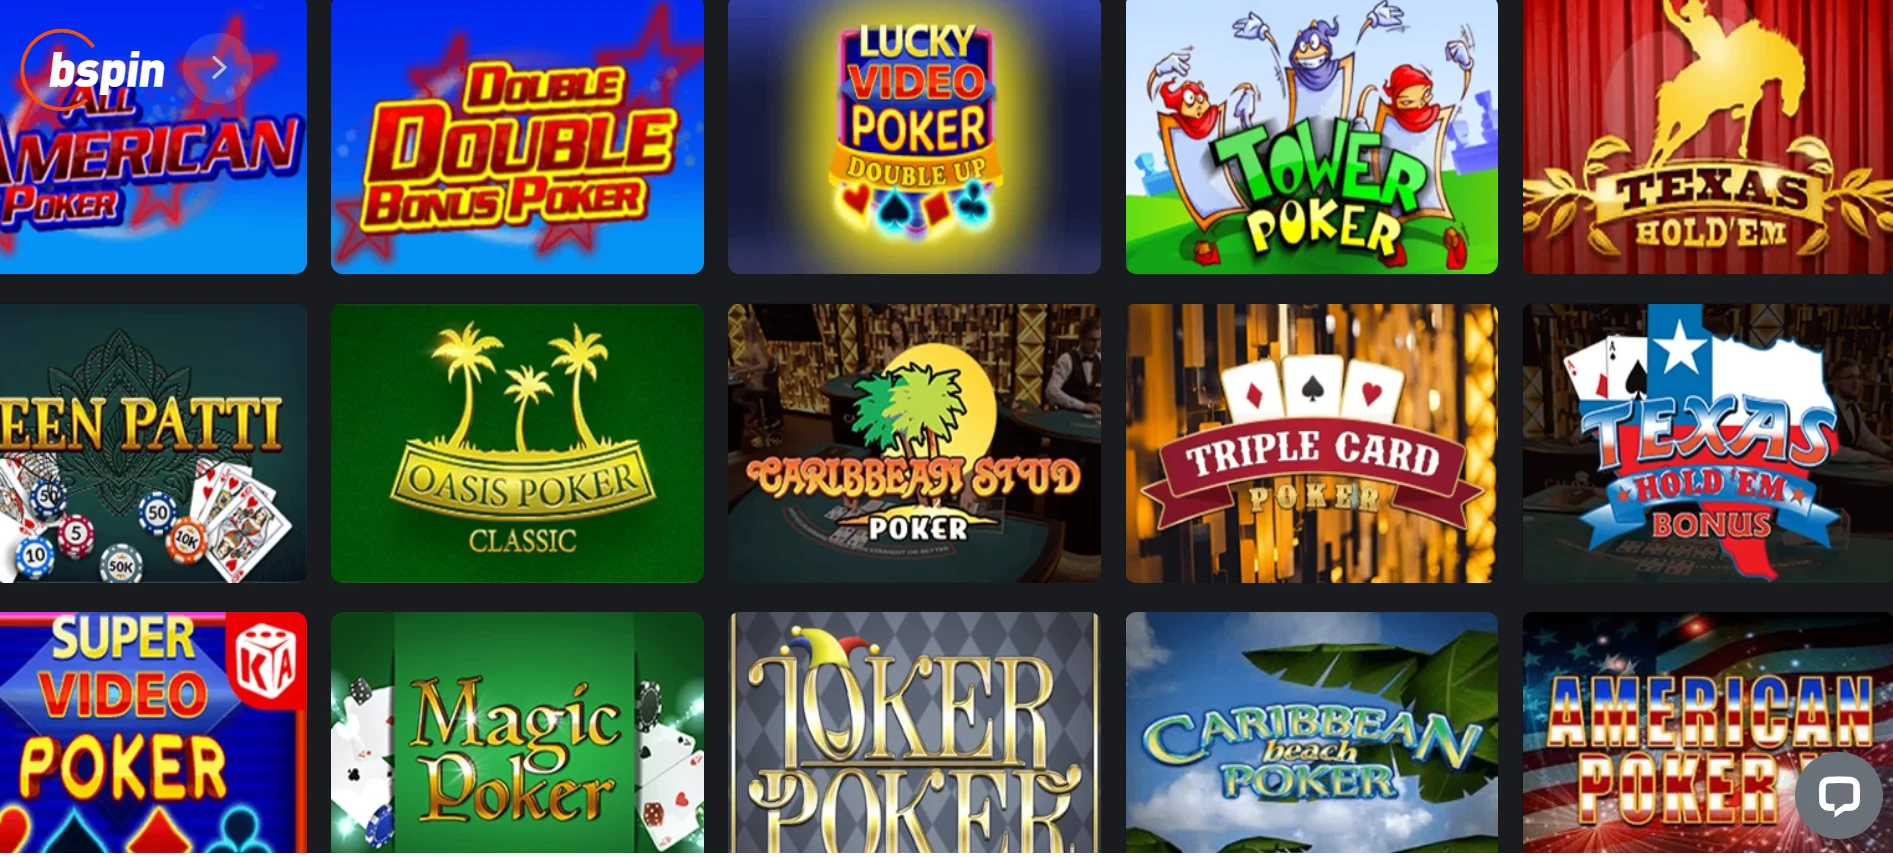 Bspin Casino poker selection